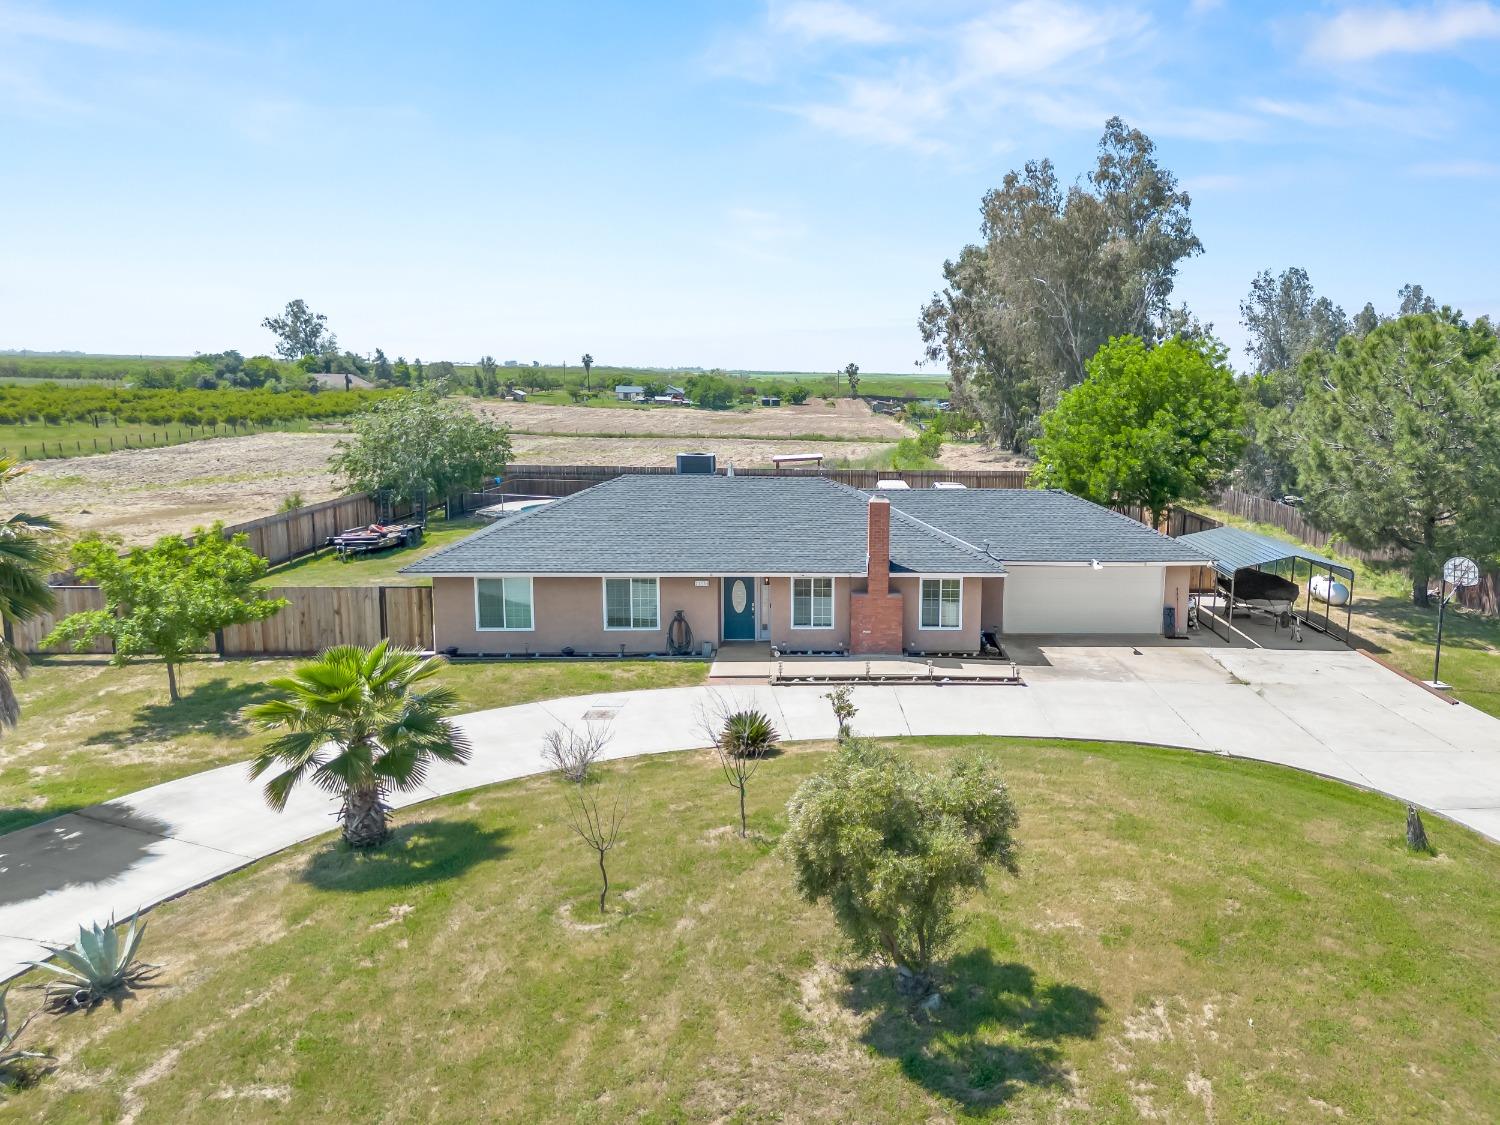 Photo of 21784 Elmwood Rd in Madera, CA